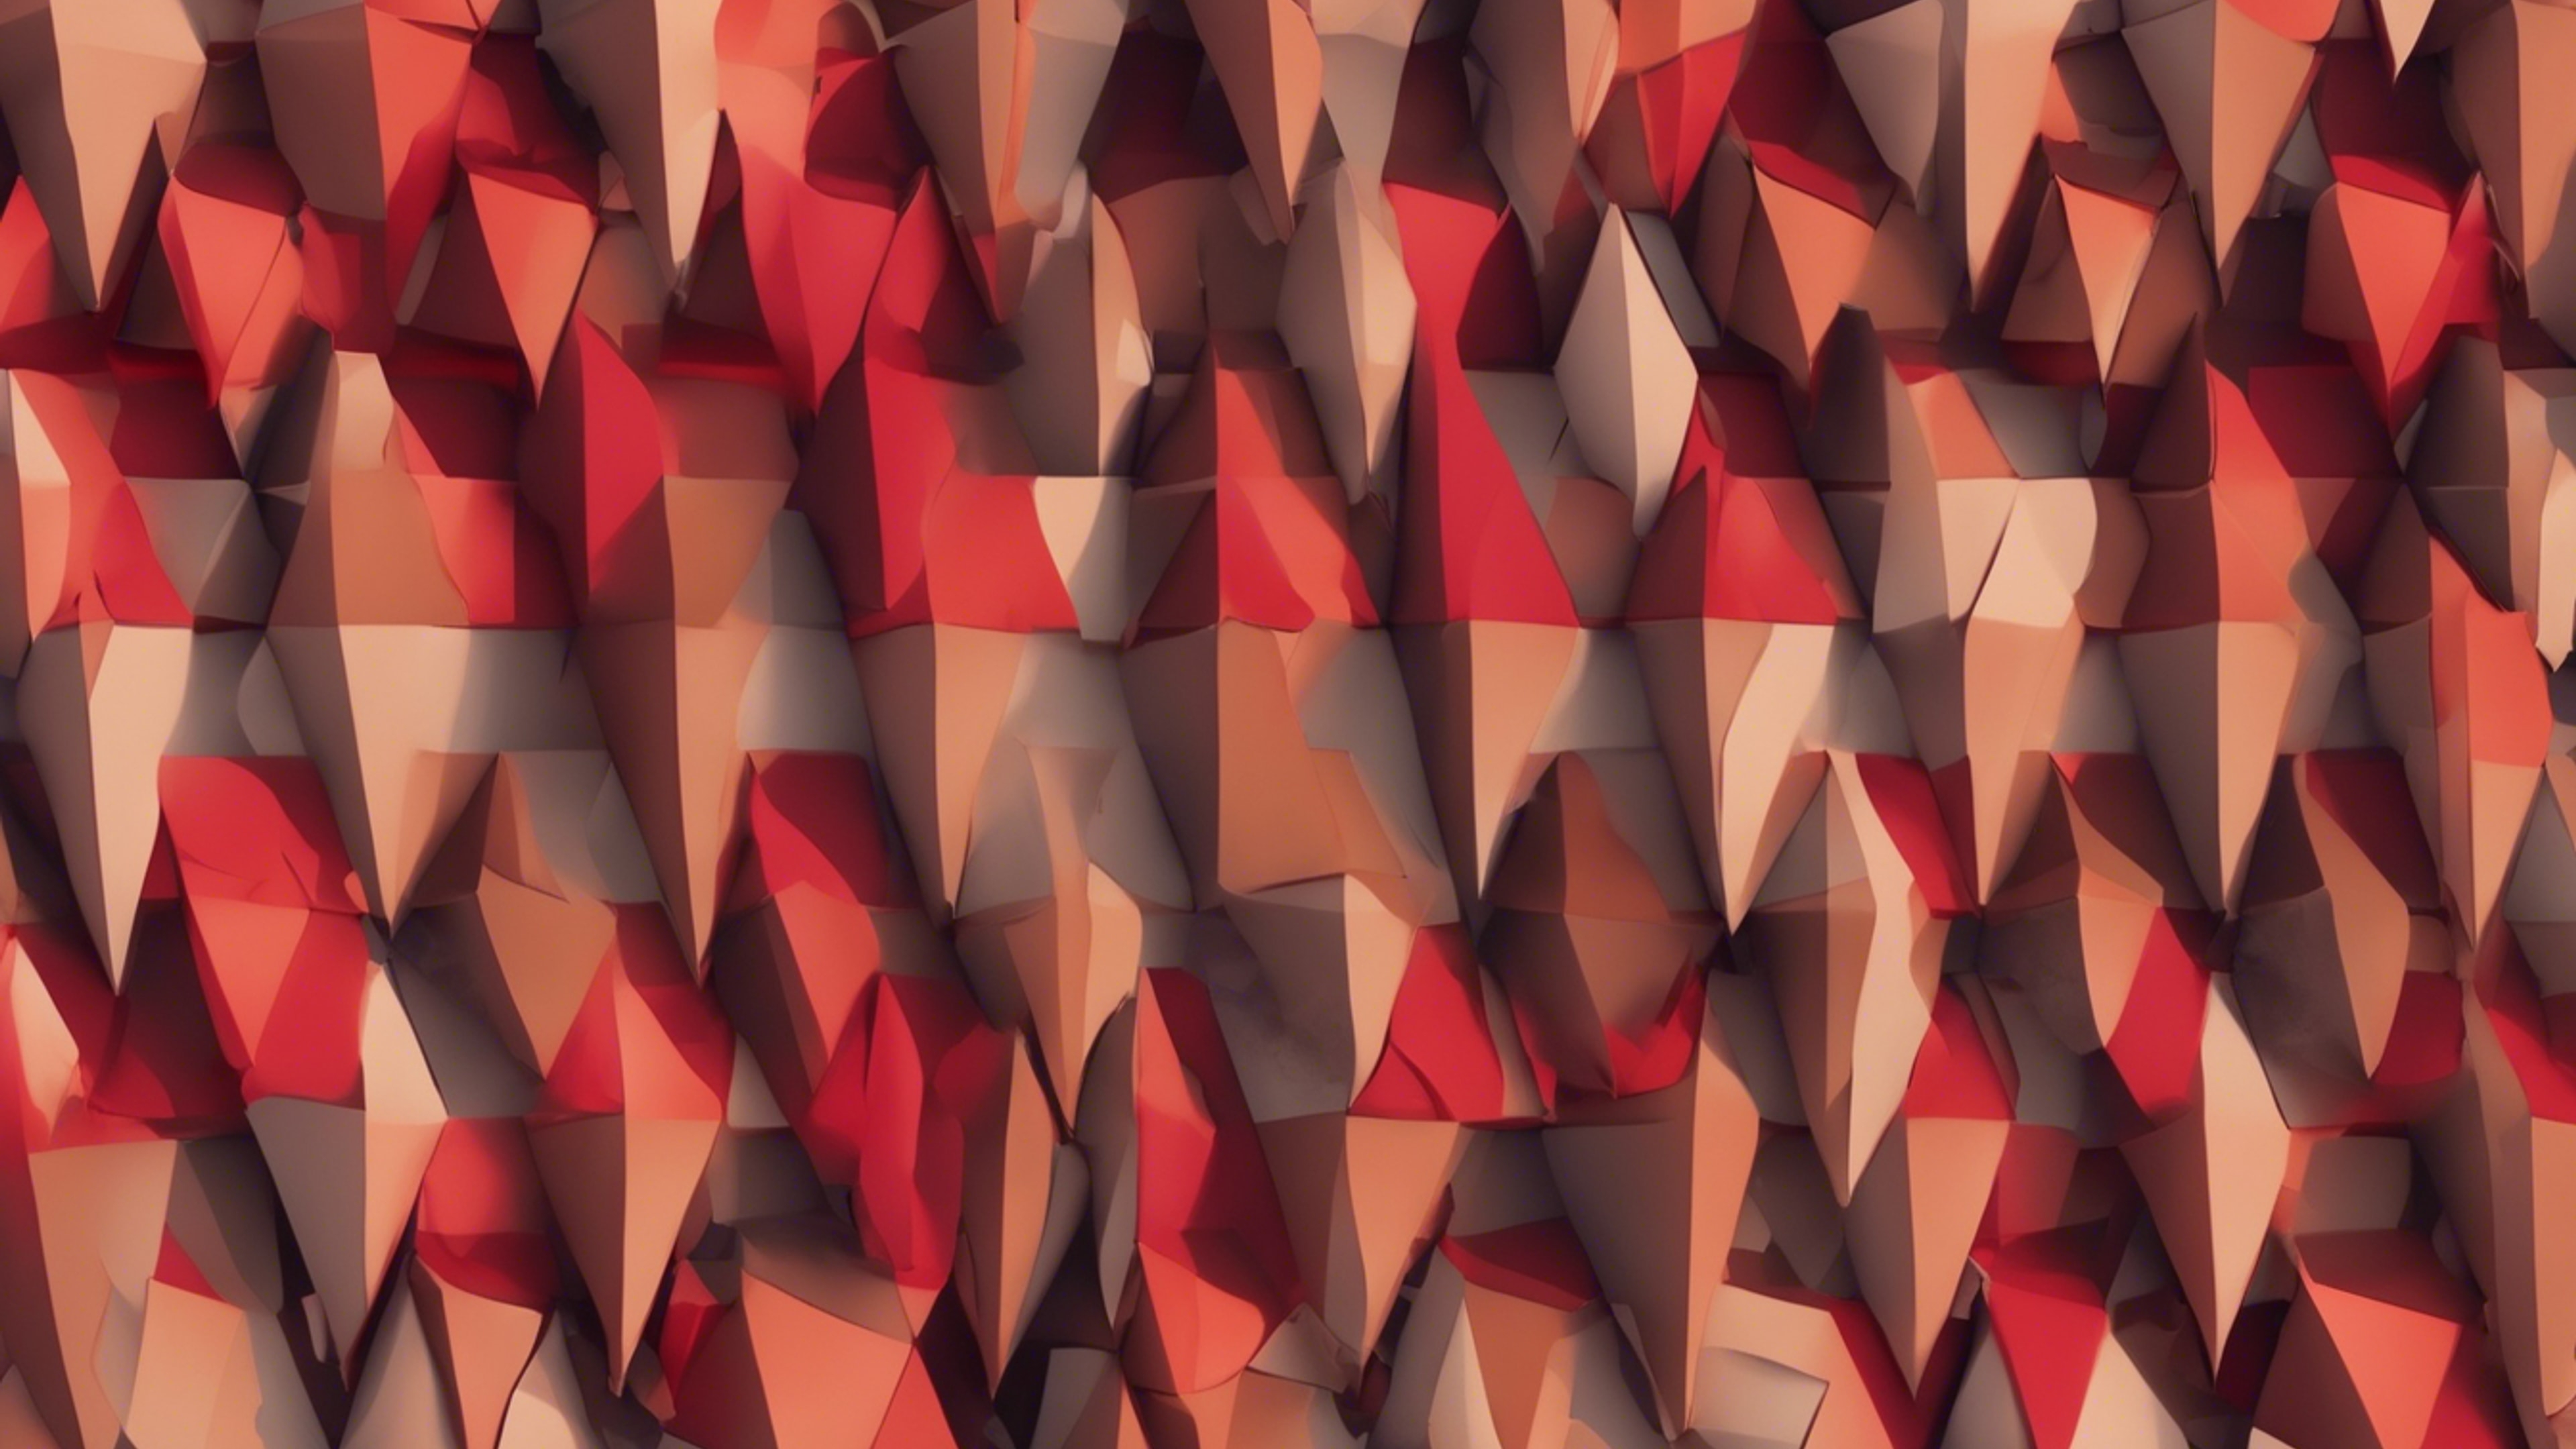 A geometrical abstract pattern consisting of trapeziums in shades of vibrant red and muted brown. ورق الجدران[25af3713355d4095863a]